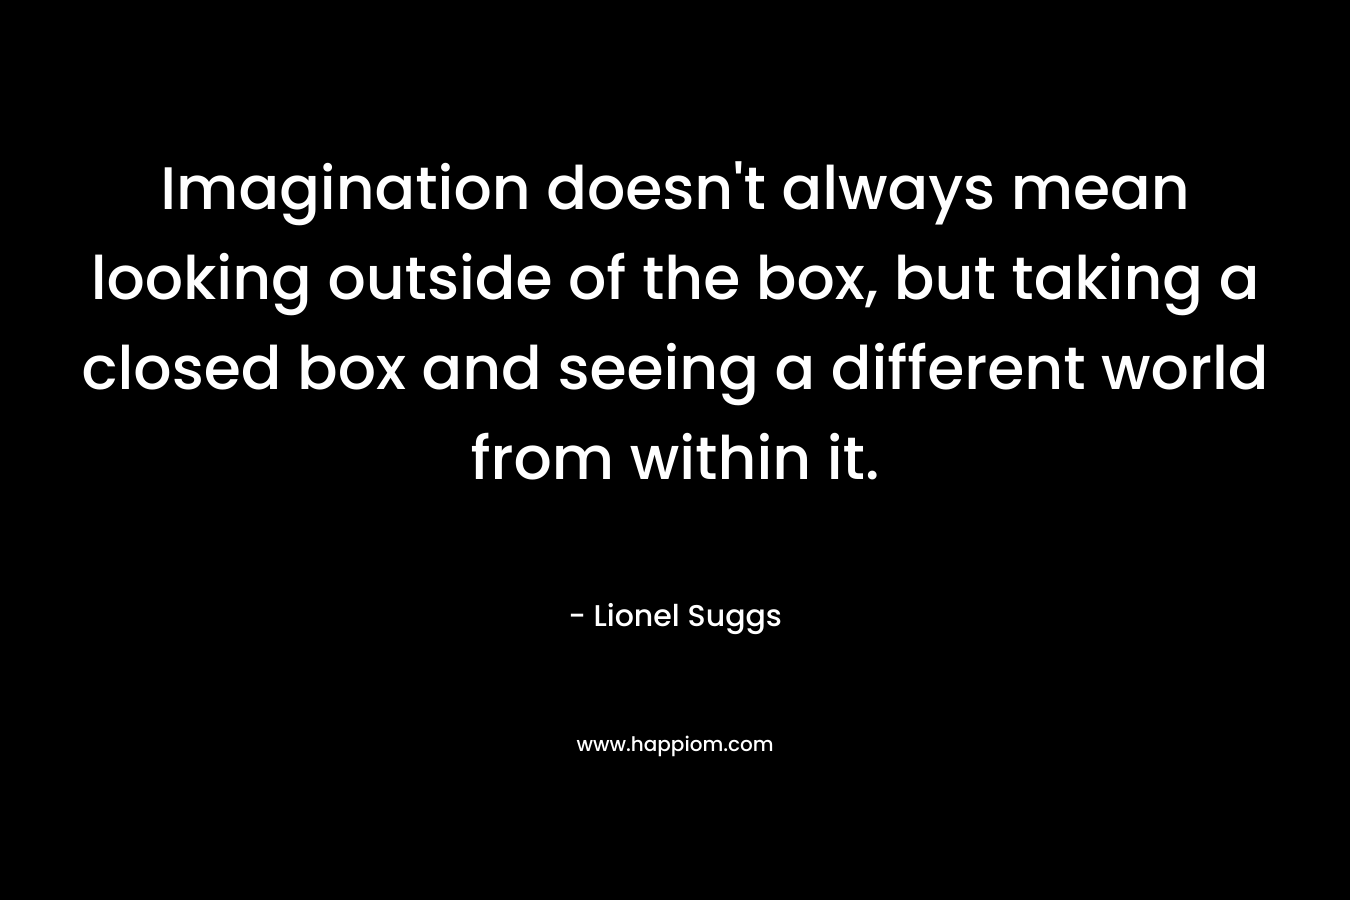 Imagination doesn't always mean looking outside of the box, but taking a closed box and seeing a different world from within it.